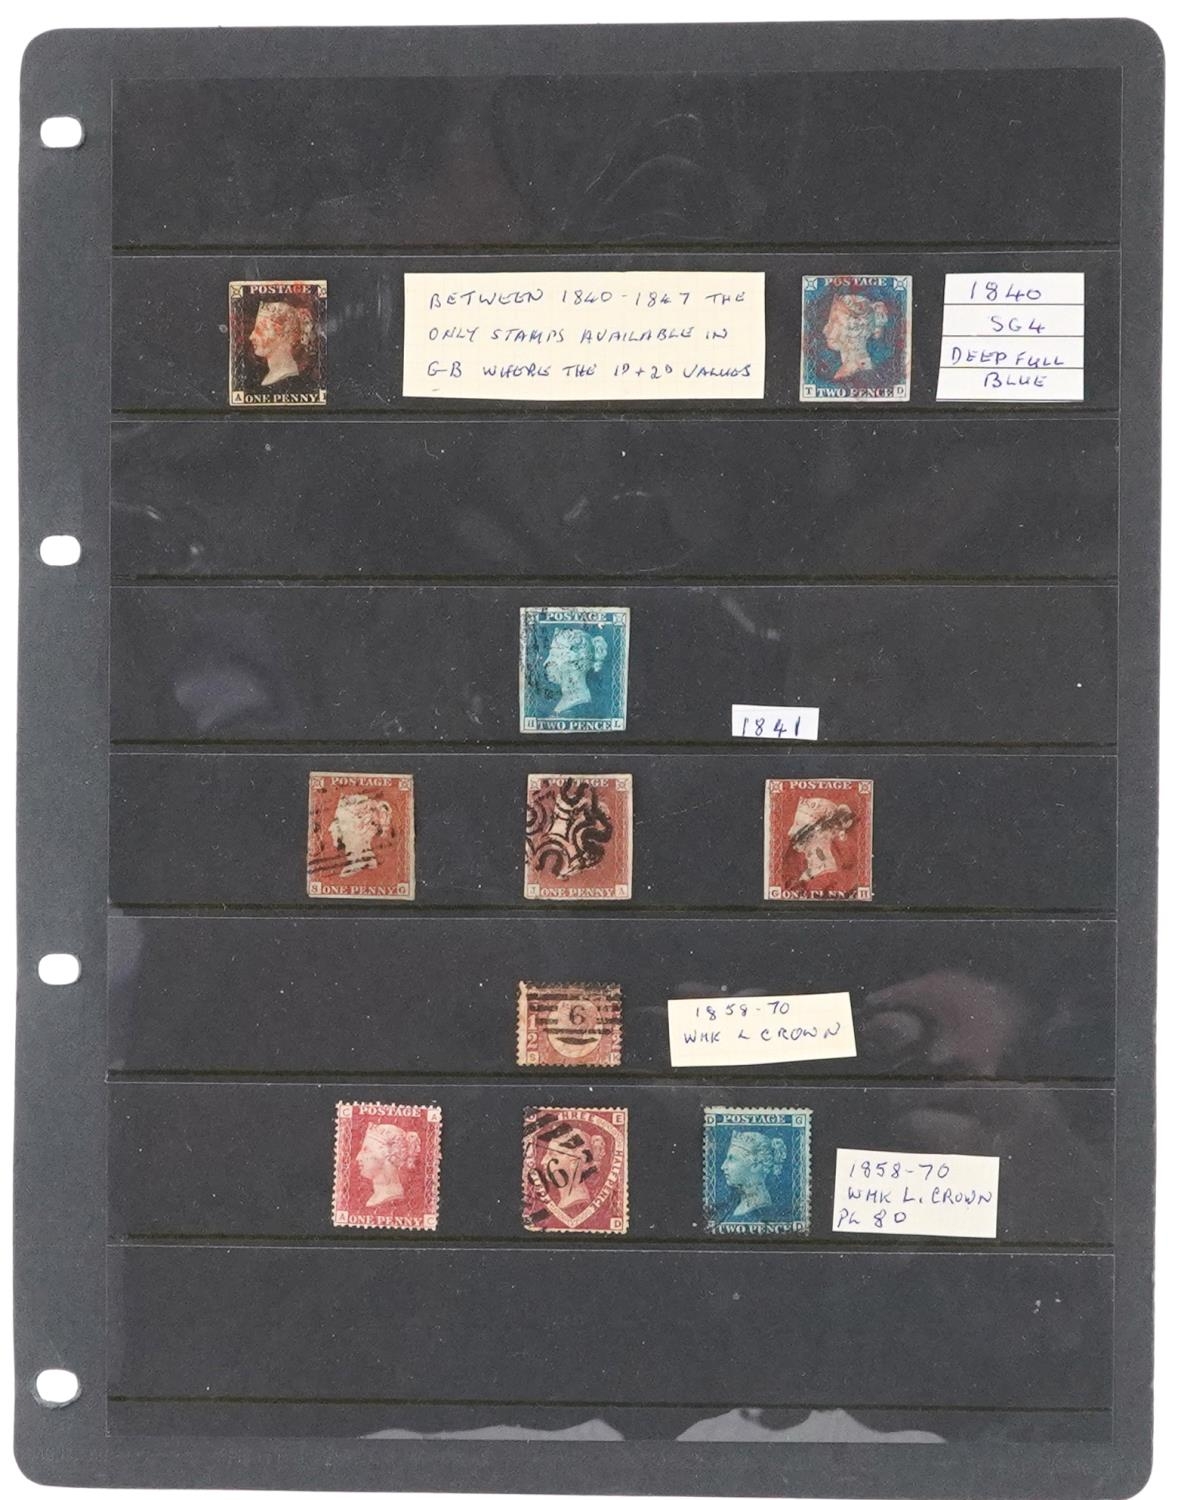 Victorian British stamps arranged on a sheet including Penny Black, Two Penny Blues and Penny Reds